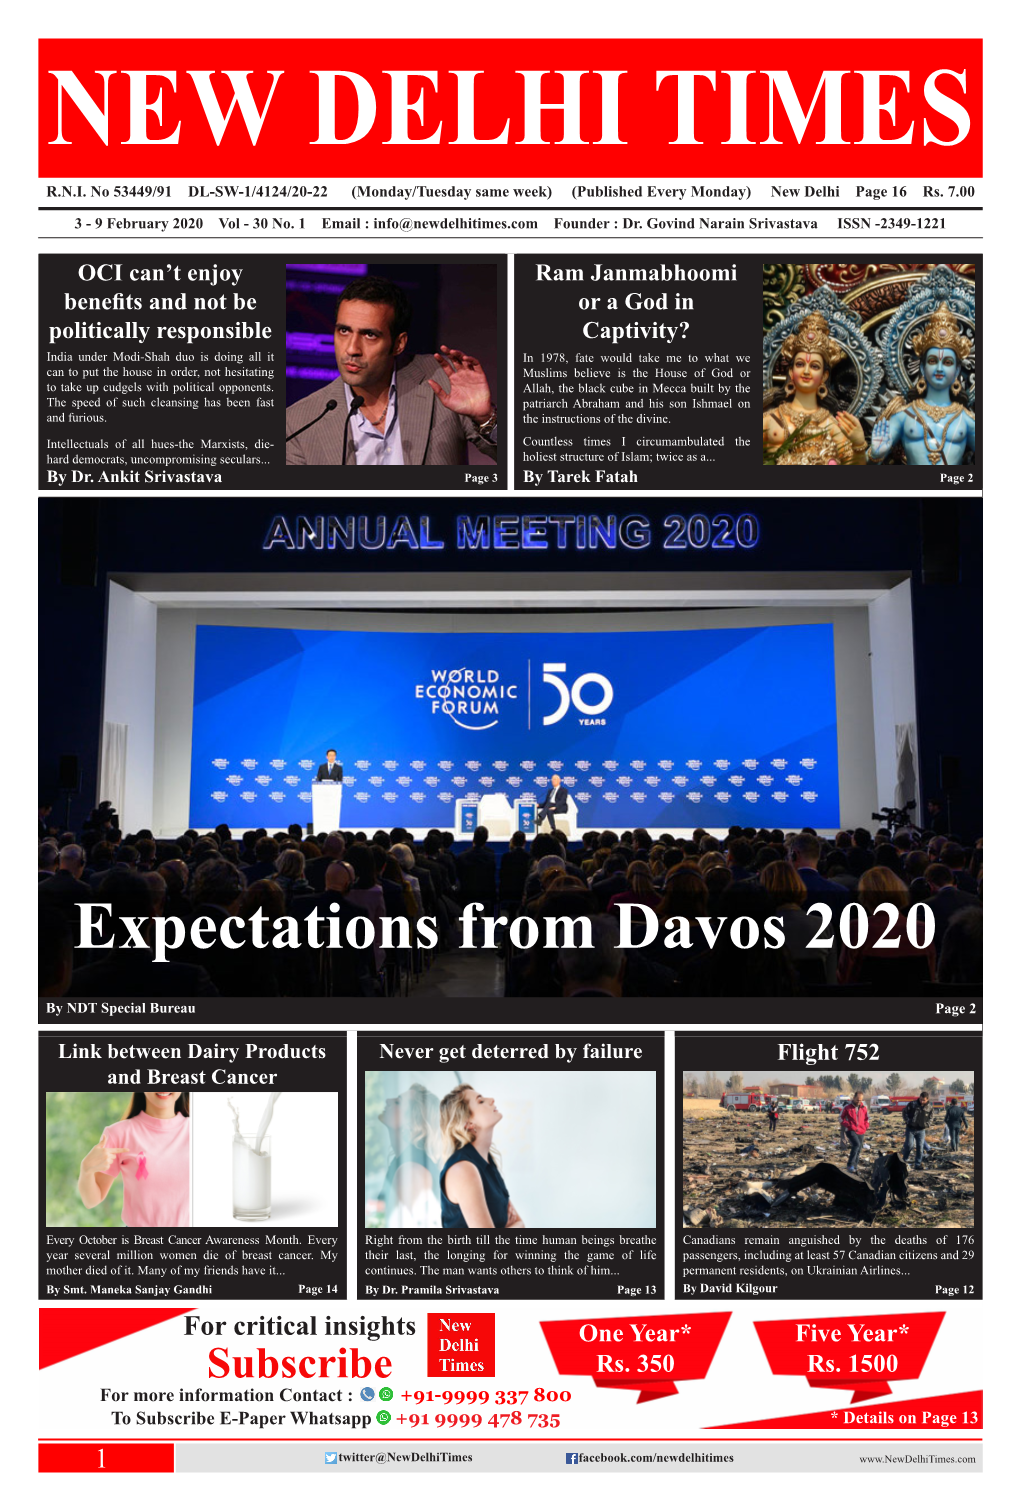 Expectations from Davos 2020